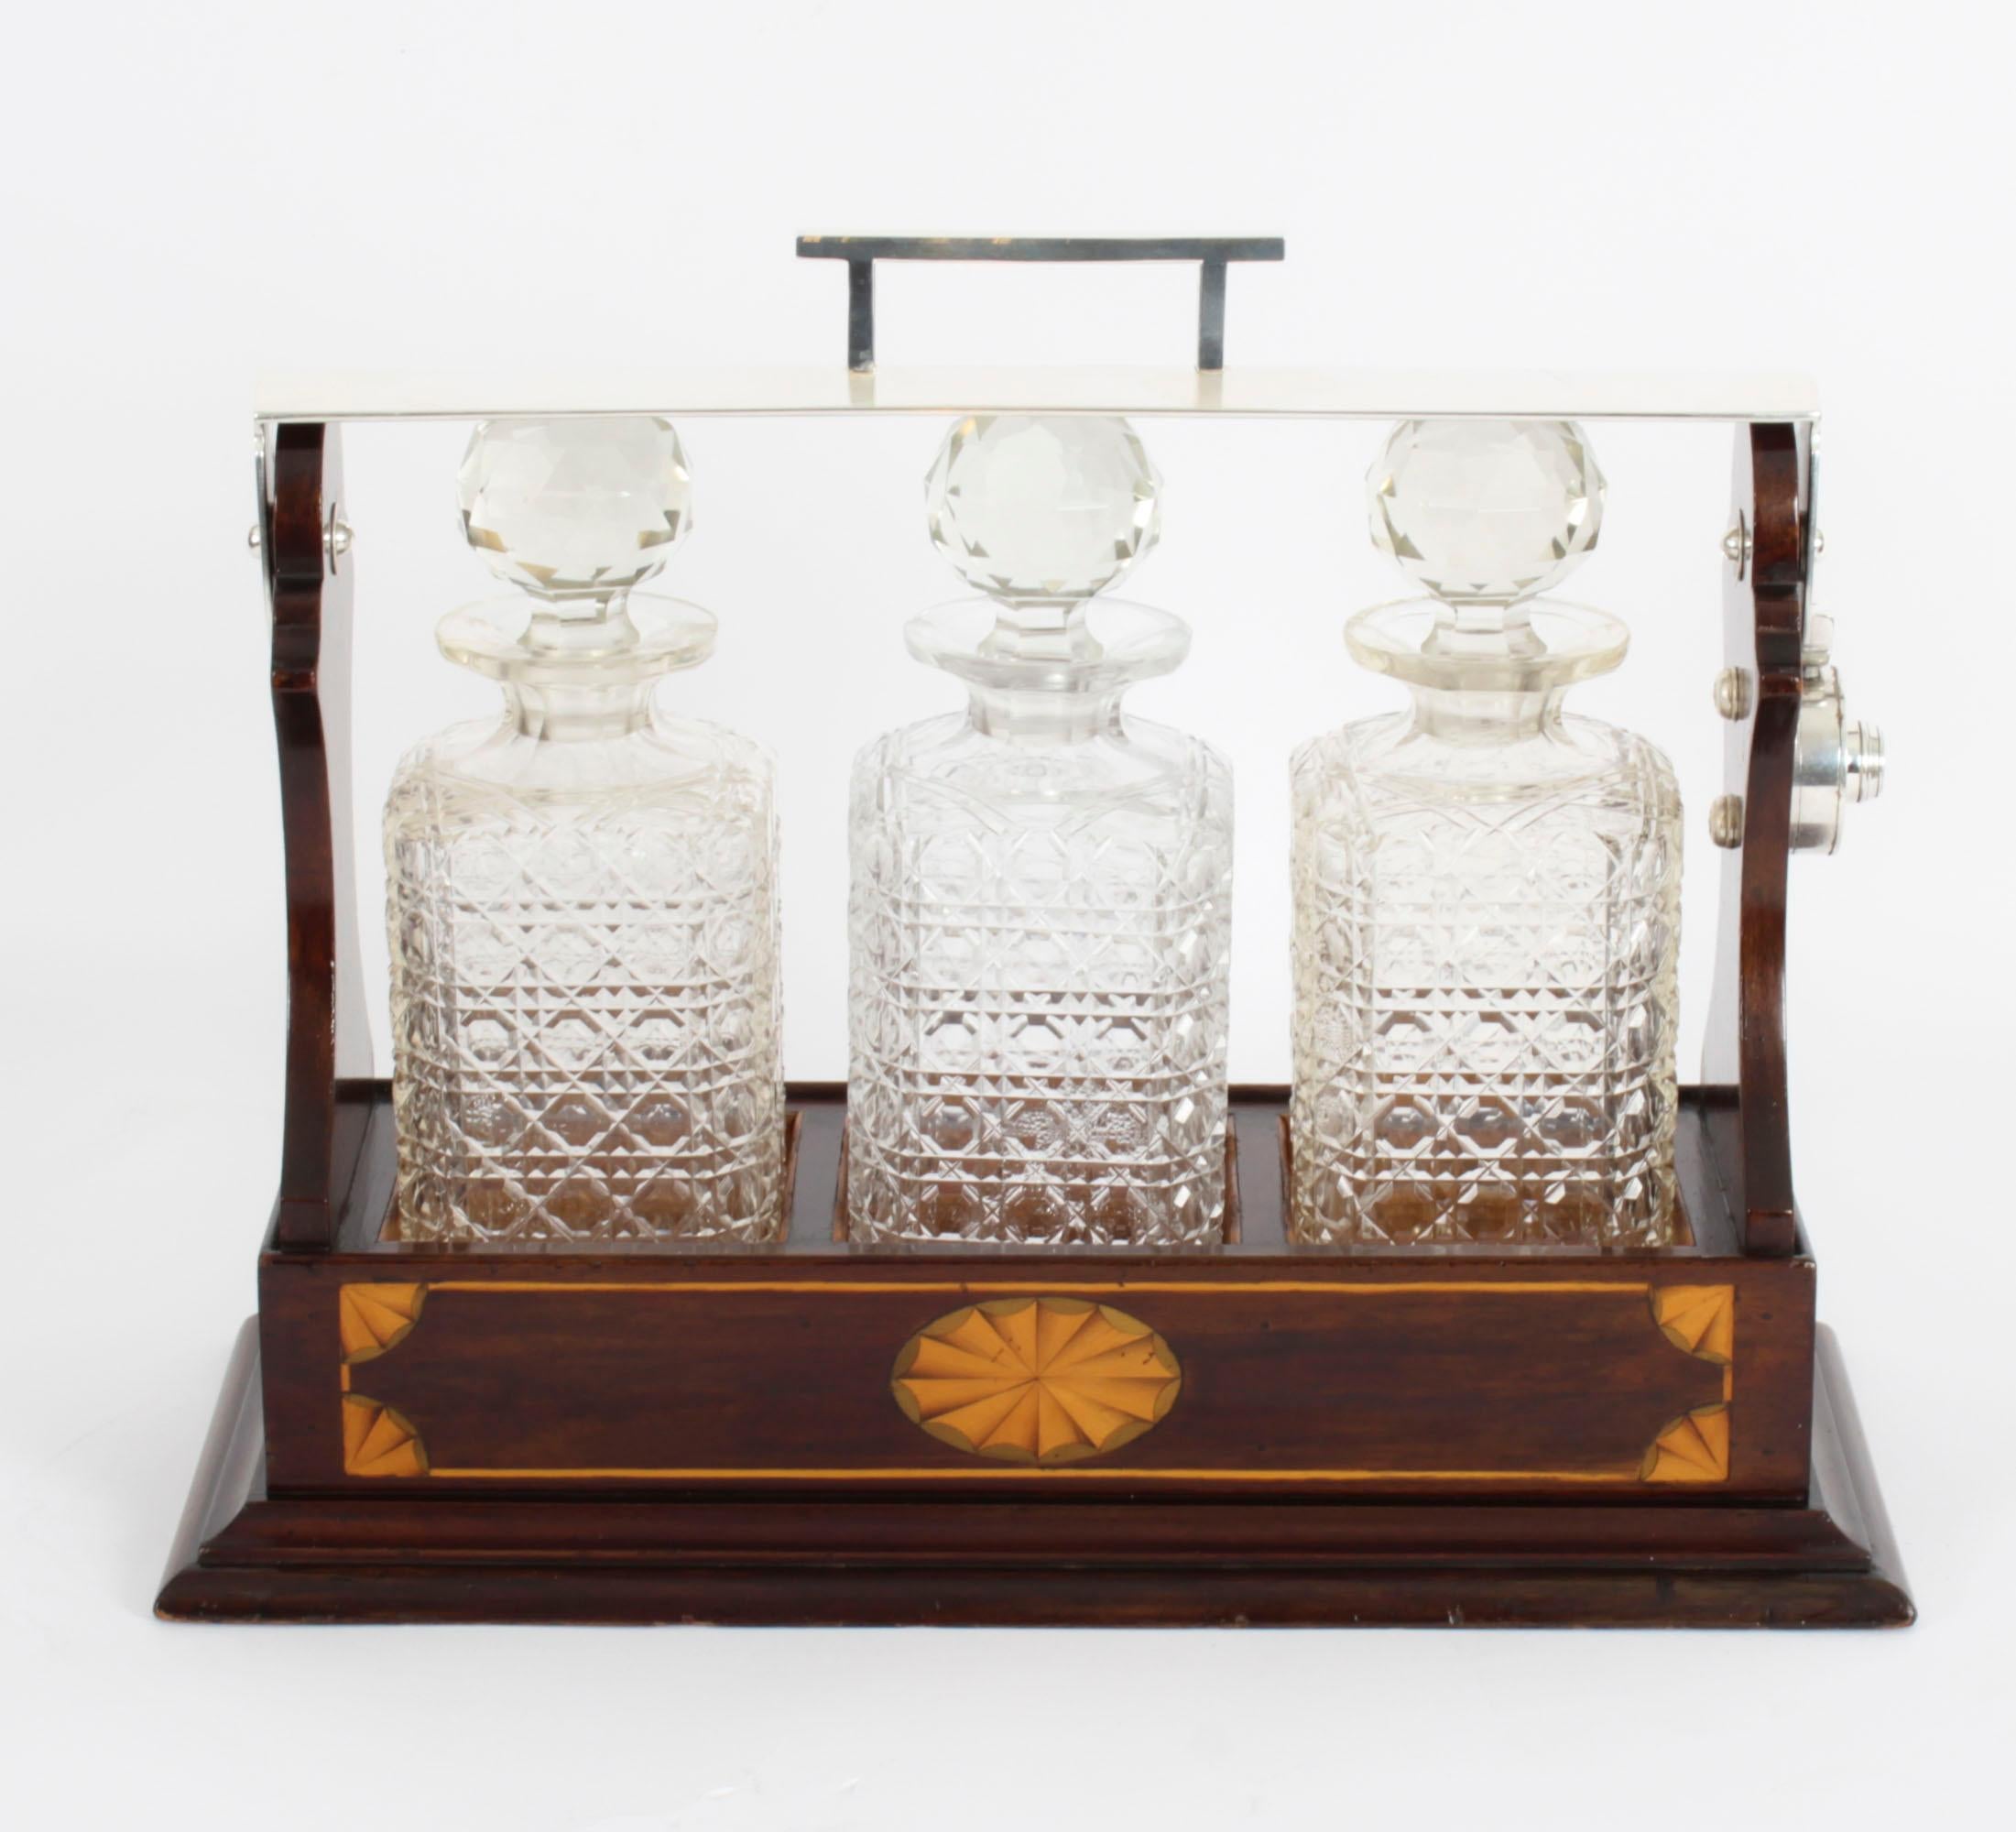 This is a superb antique Victorian walnut cased three decanter tantalus with decorative inlaid satinwood decoration, c1870 in date.
 
It was skillfully crafted in walnut with beautiful fan and line inlaid decoration and a stylish silver plated